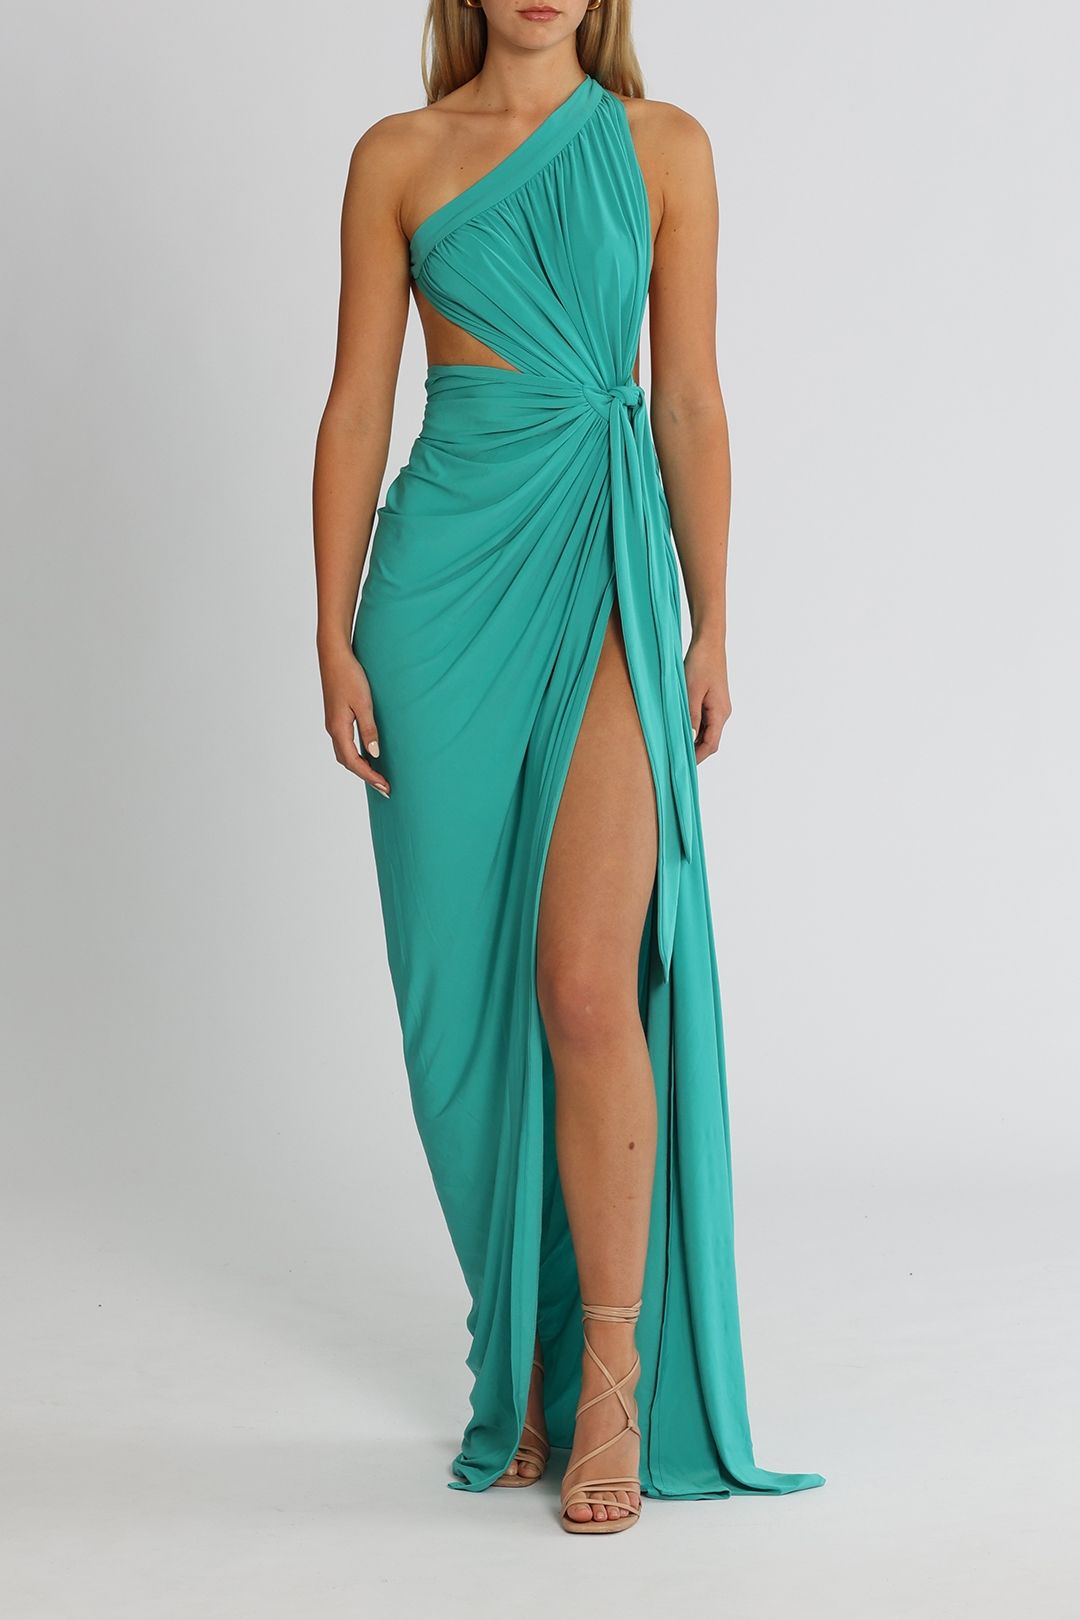 J. Angelique Disa Gown Teal Green